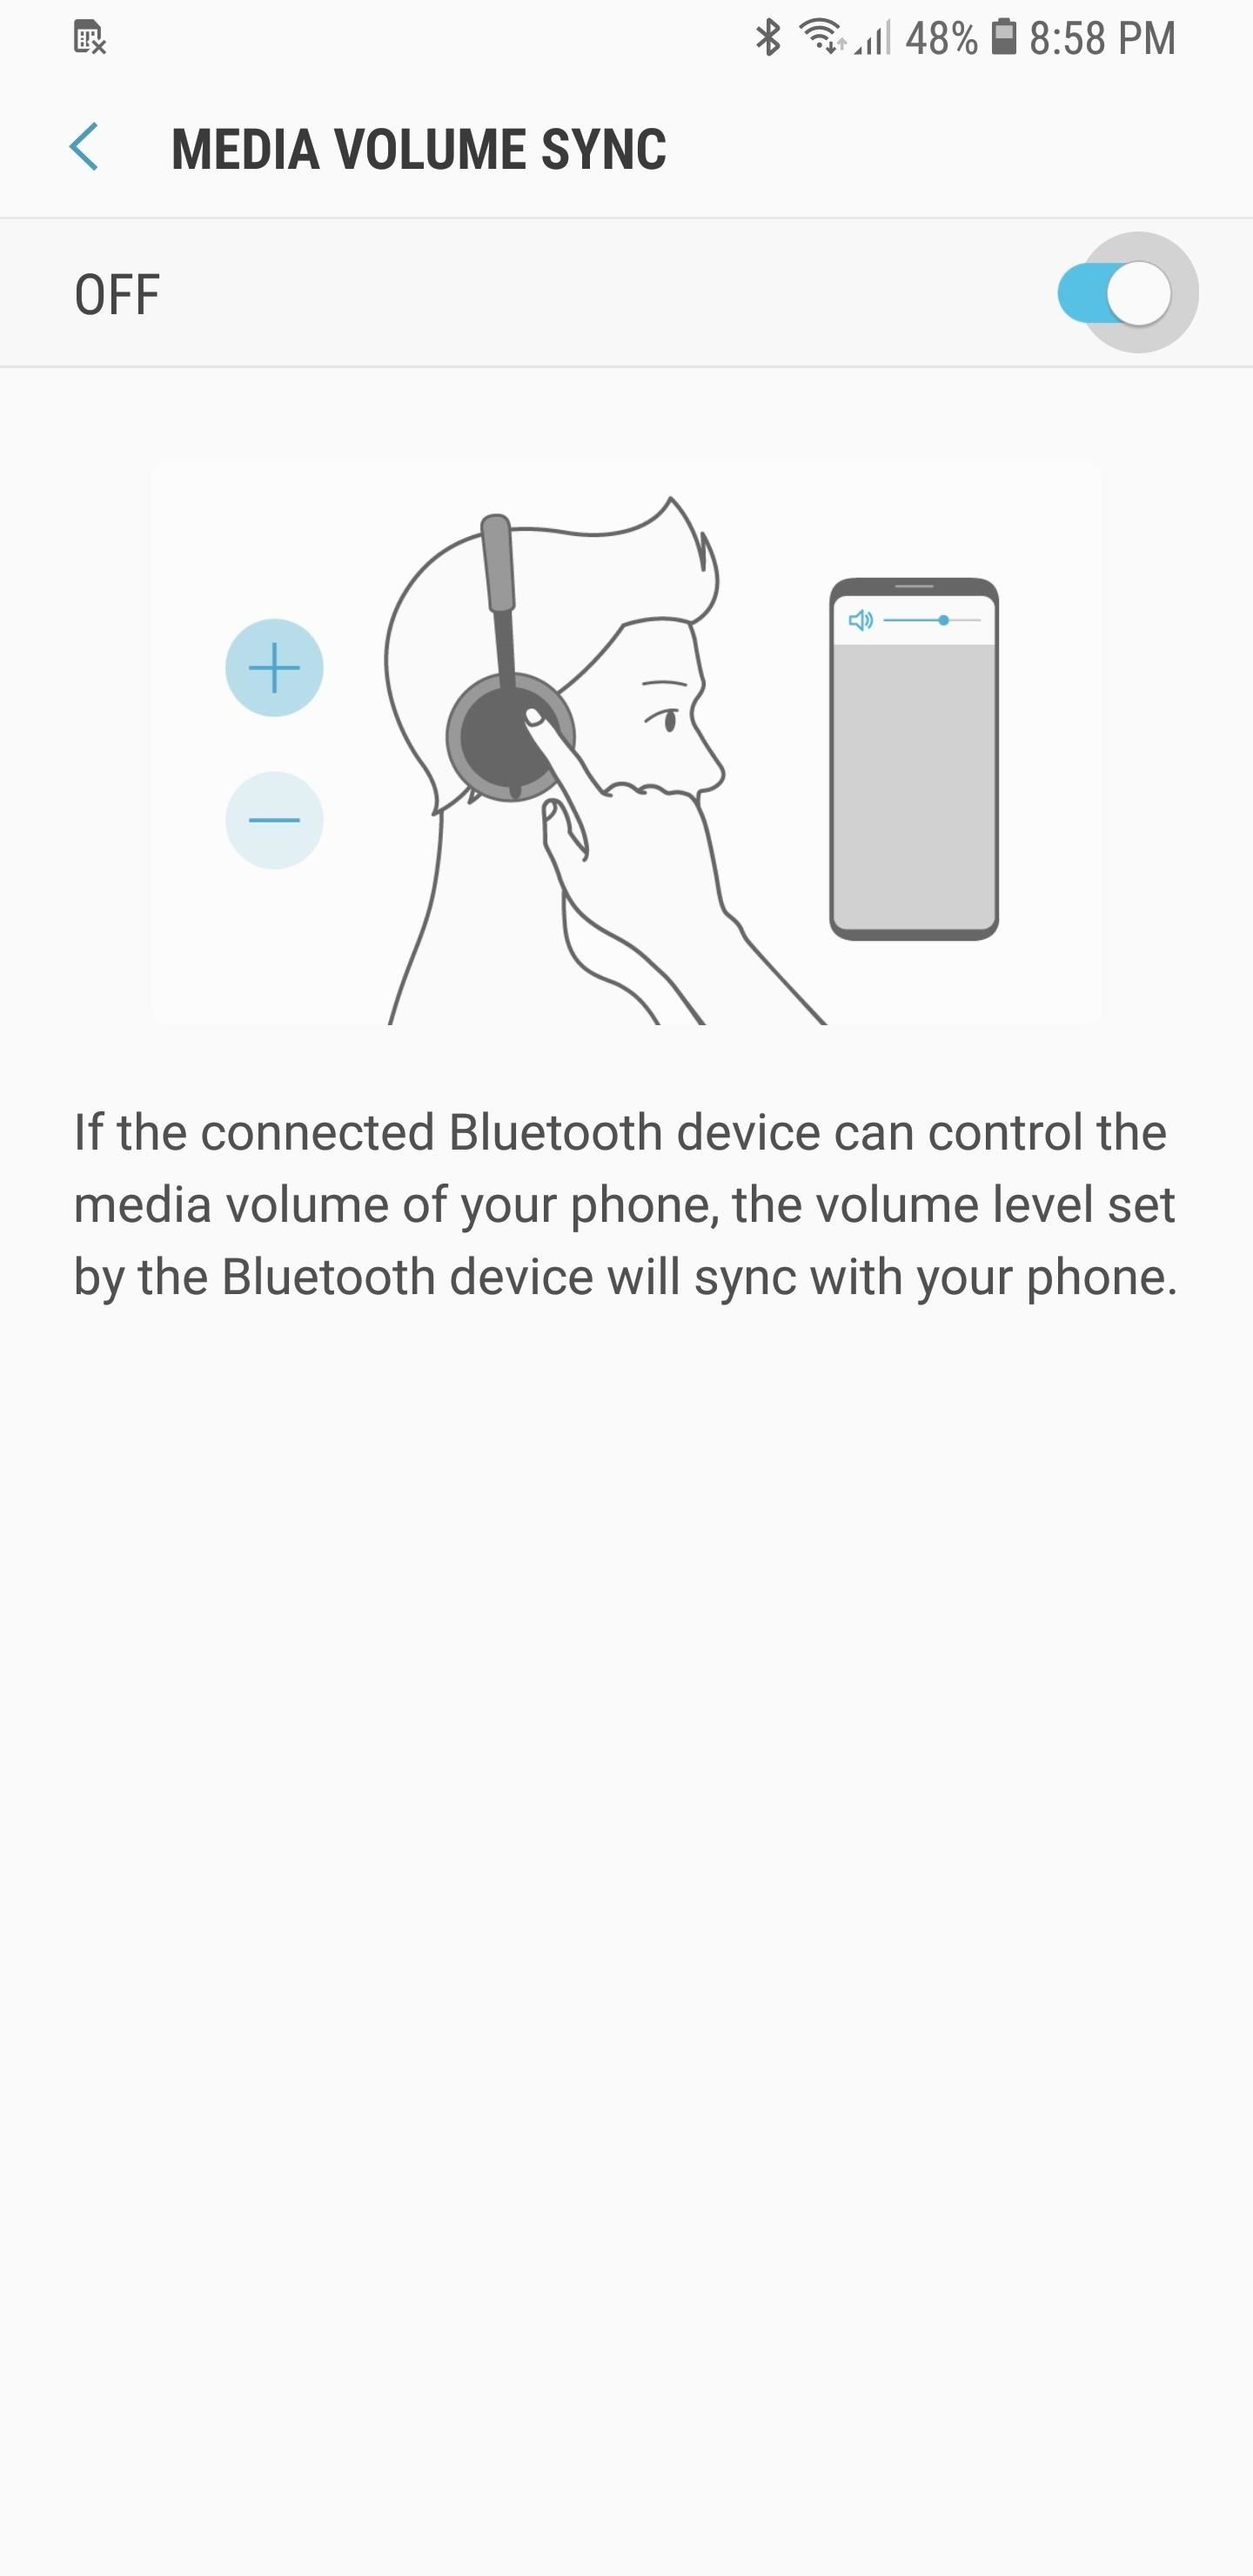 5 Ways to improve the Bluetooth experience on your Samsung Galaxy